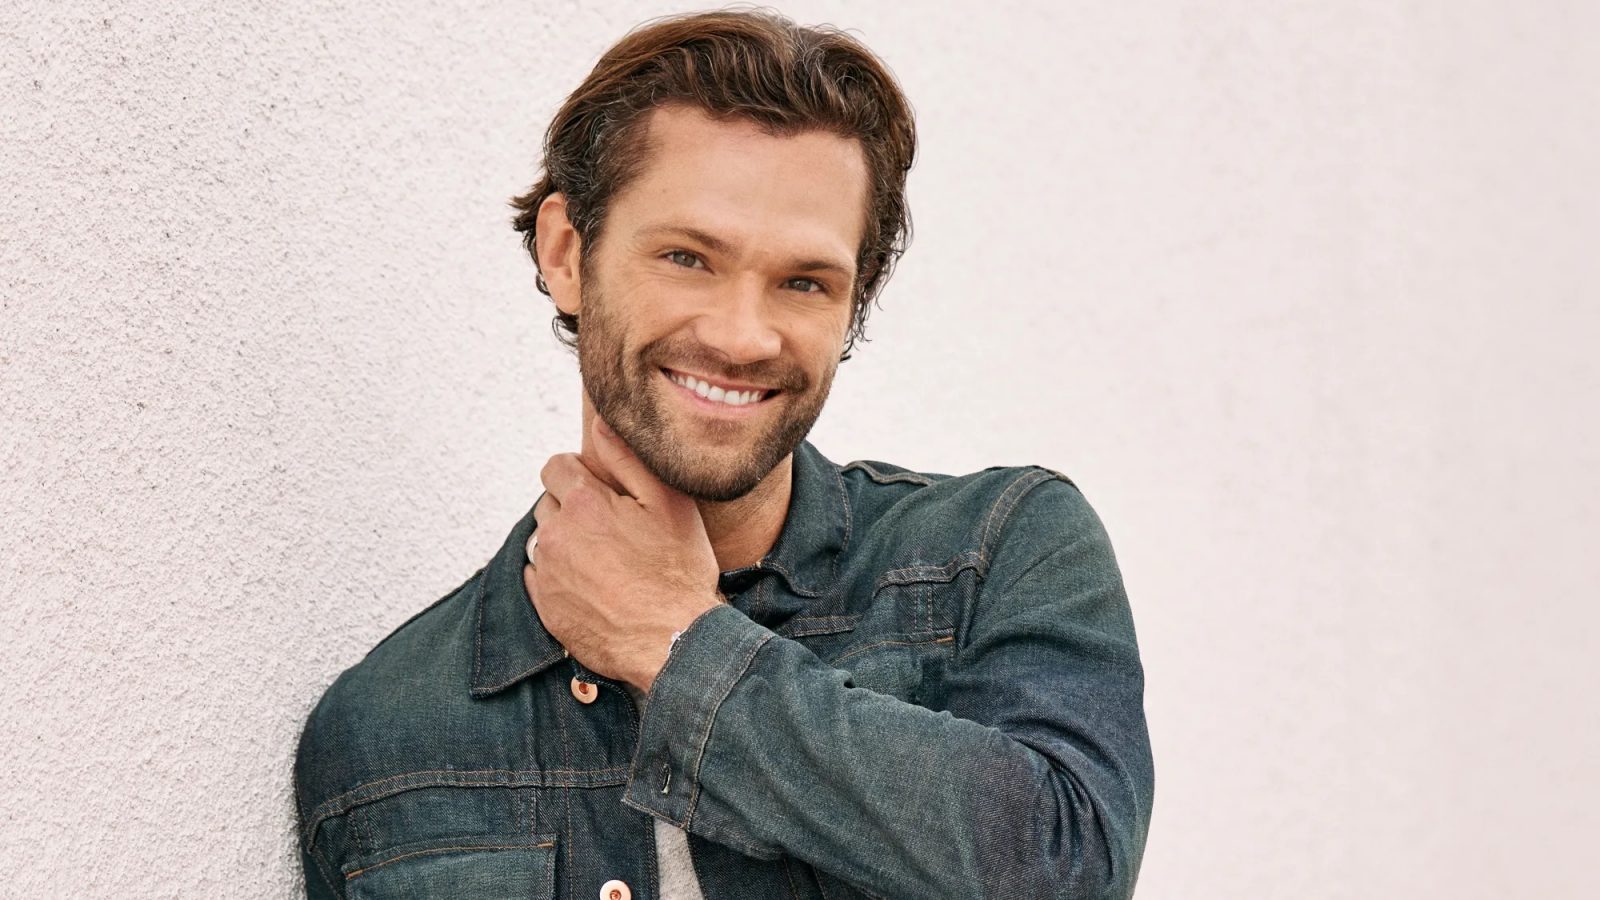 It’s Time to Decide If These Popular Male Celebrities Are Attractive or Not Jared Padalecki